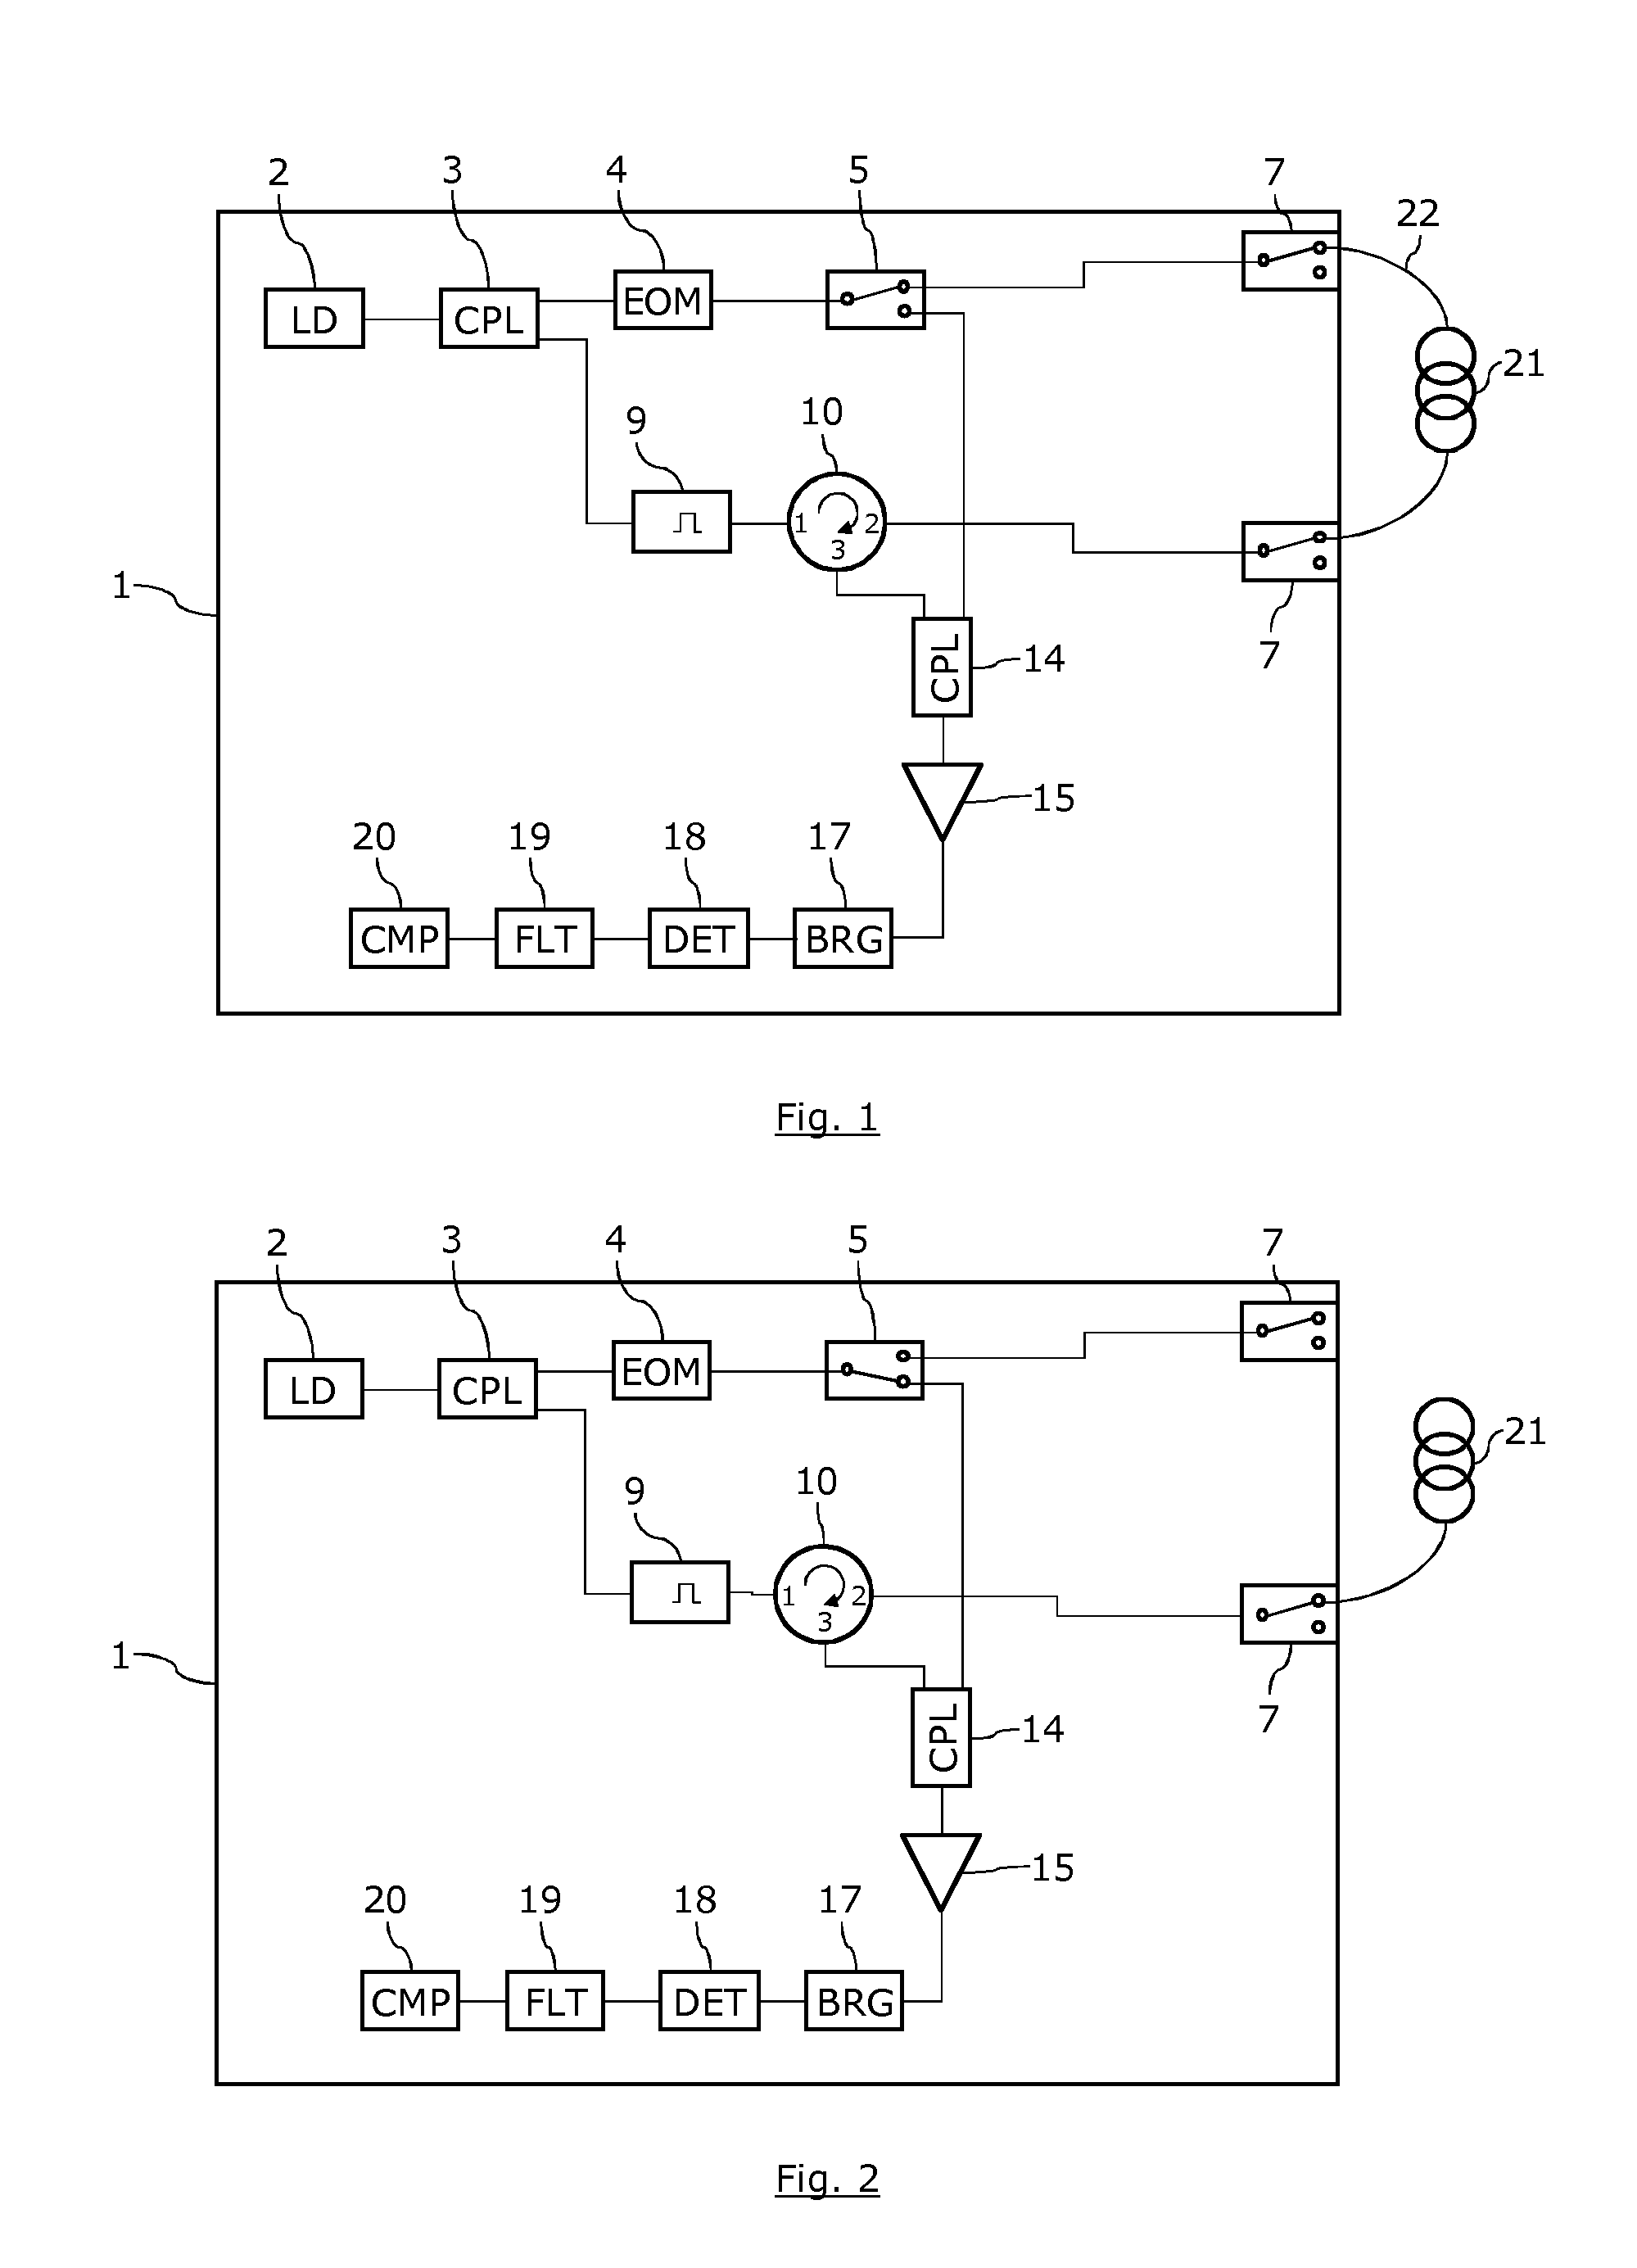 Brillouin optical distributed sensing device and method with improved tolerance to sensor failure